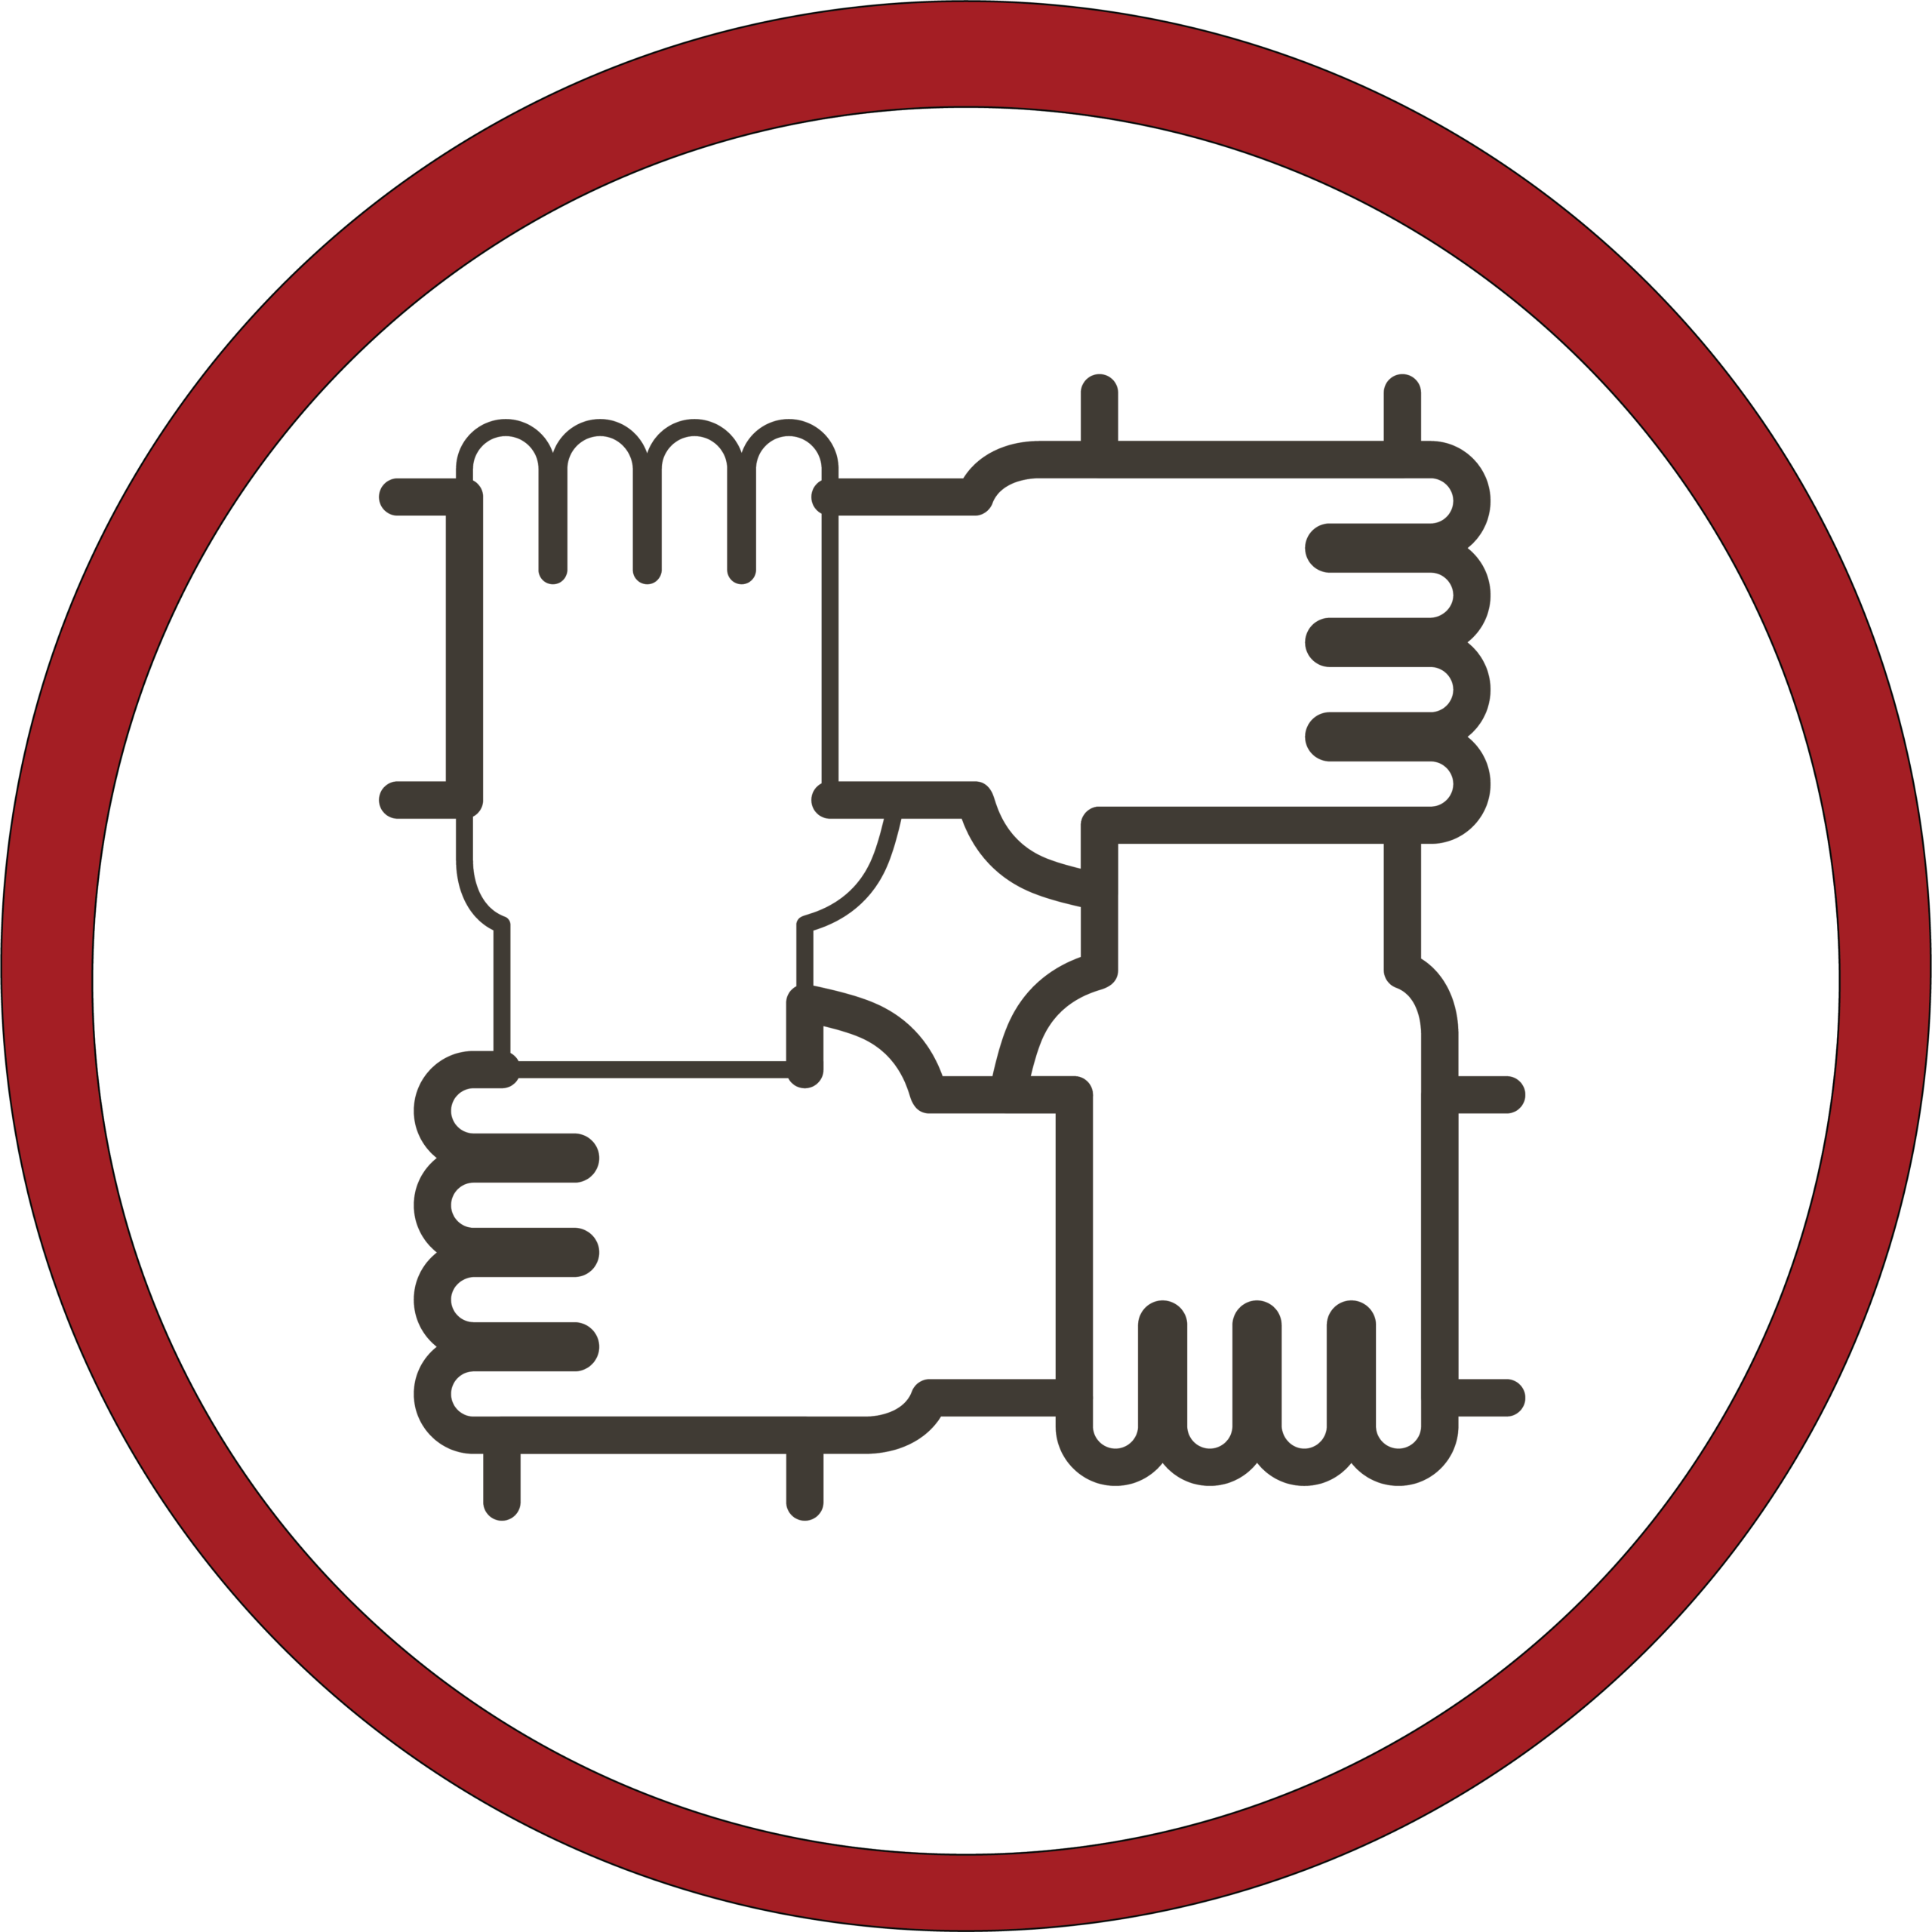 Icon of 4 hands holding each others wrists forming a square